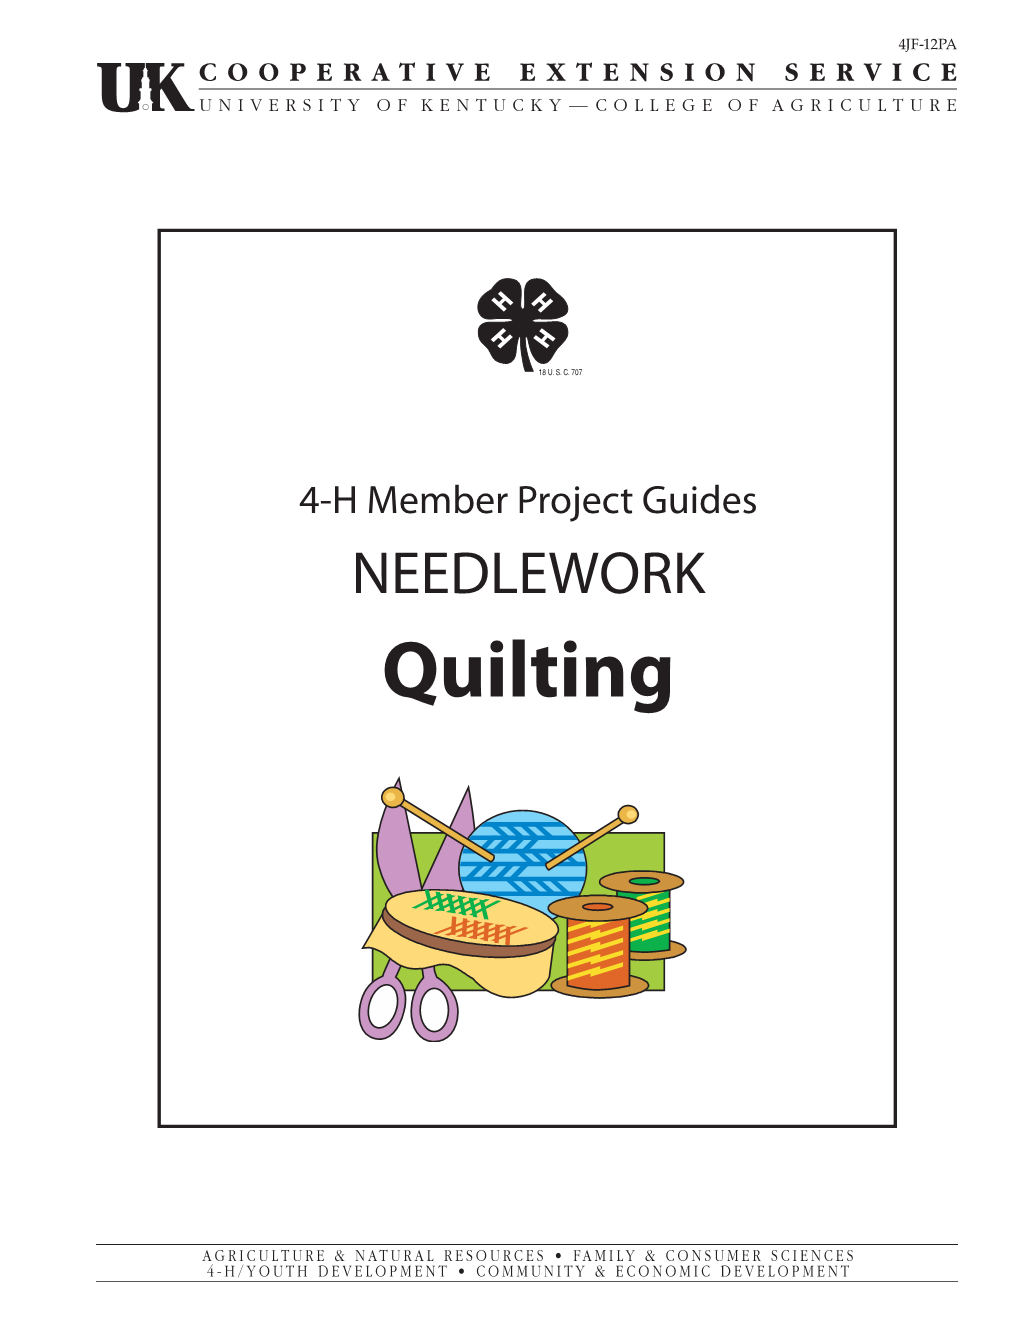 4JF12PA: 4-H Member Project Guide, Needlework, Quilting